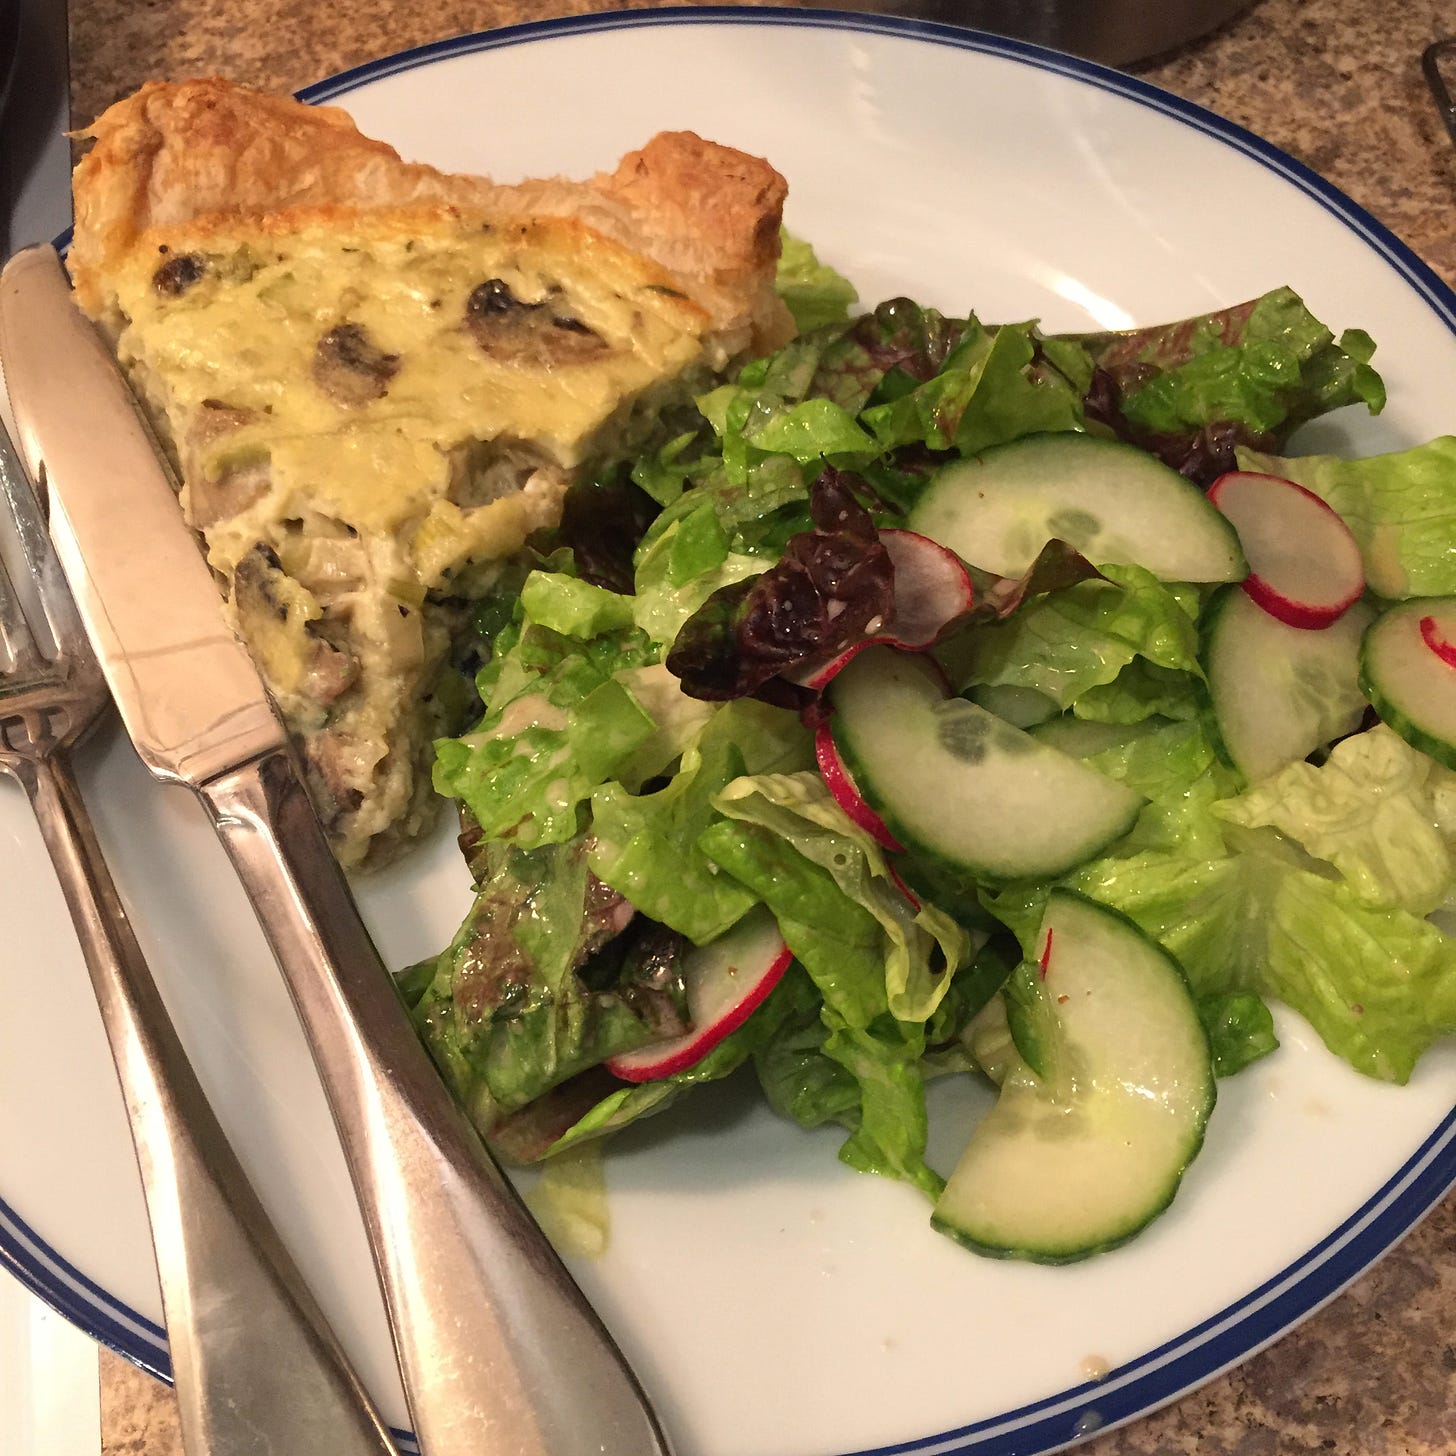 On a white plate with a blue rim, a triangle of quiche with crisp brown edges and pieces of mushrooms and leeks throughout. On its left are a knife and fork, and on its right is a large portion of green salad with cucumber and radish.